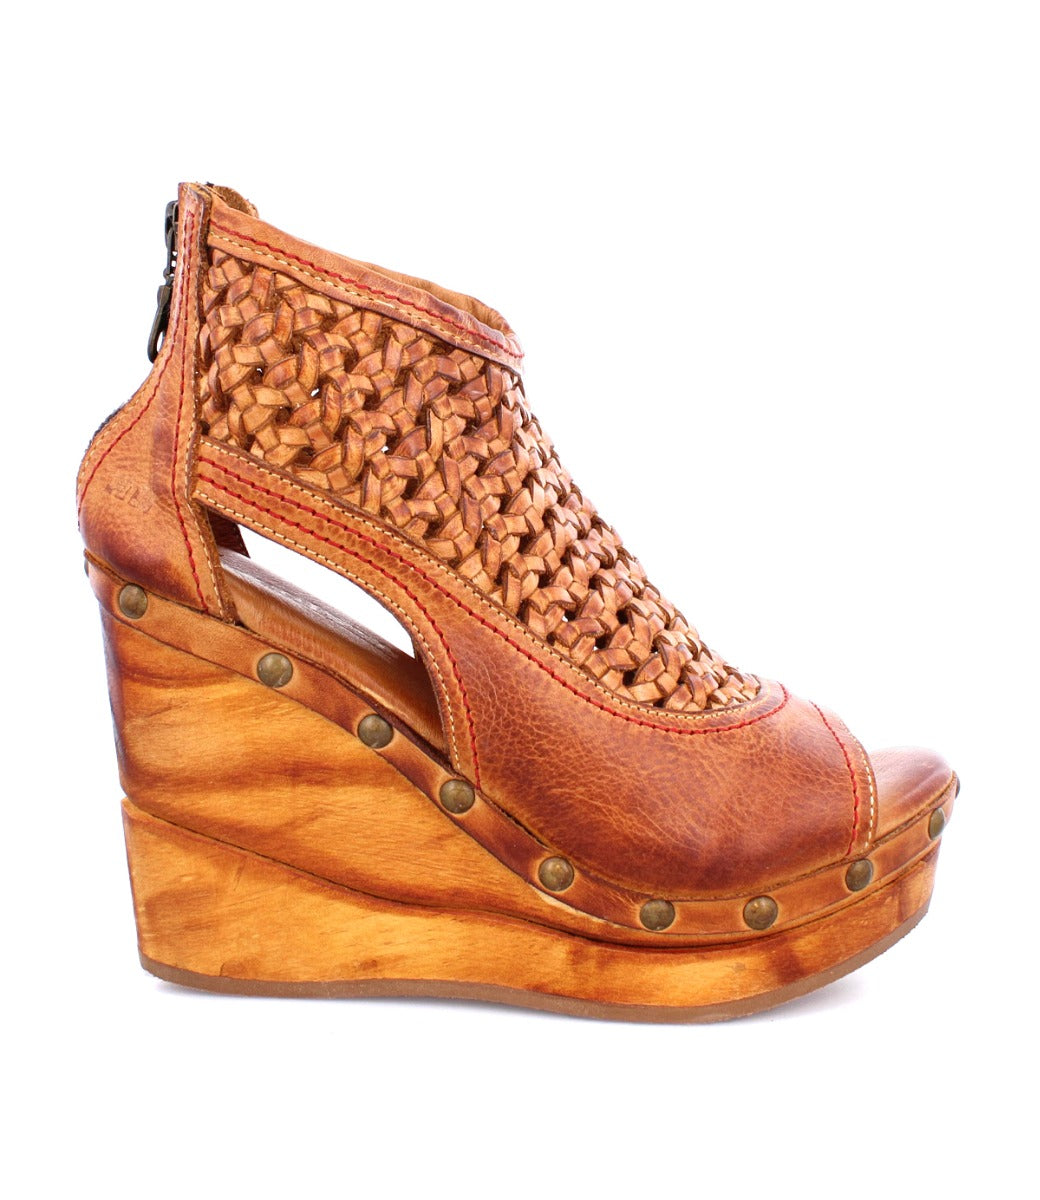 A Bed Stu Odette women's sandal with a wooden platform and woven straps.